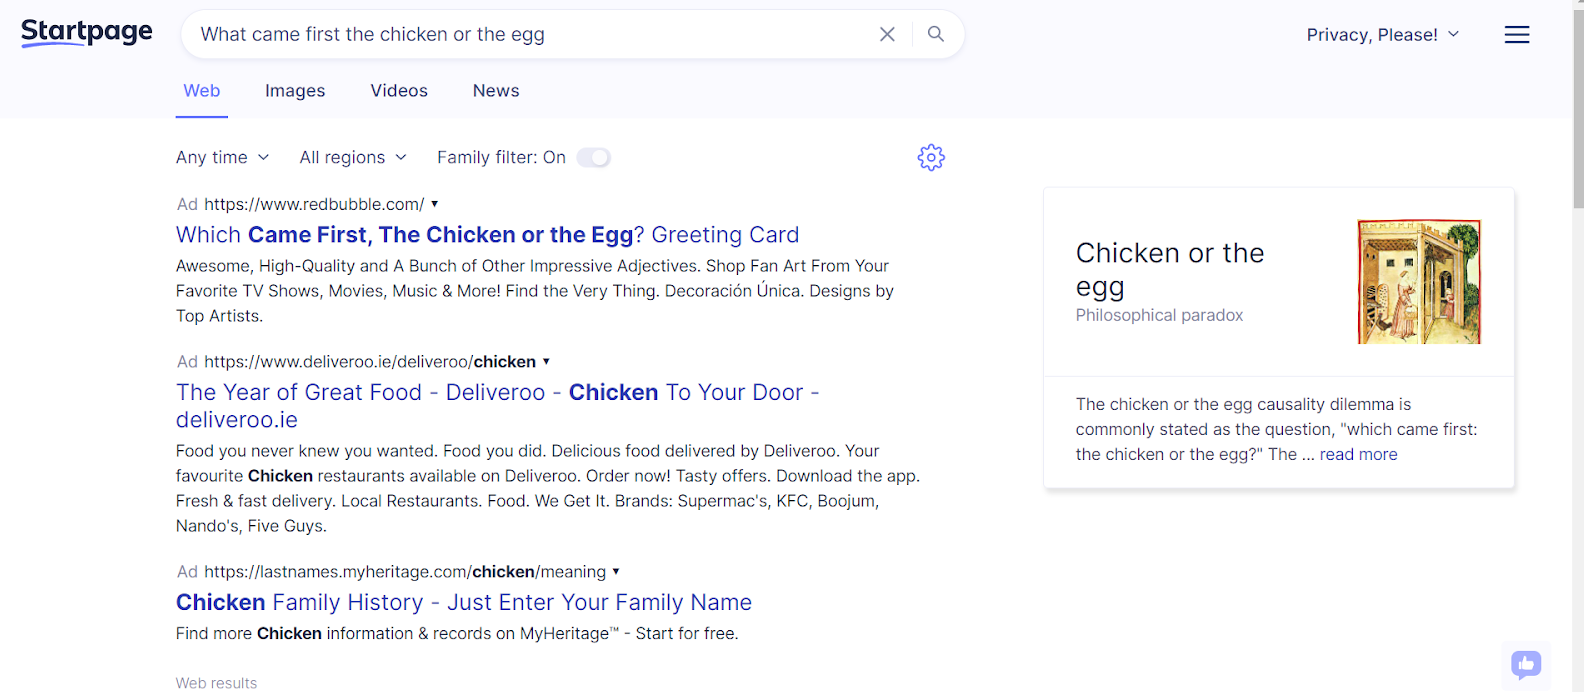 Startpage screenshot showing top search results and a featured snippet.